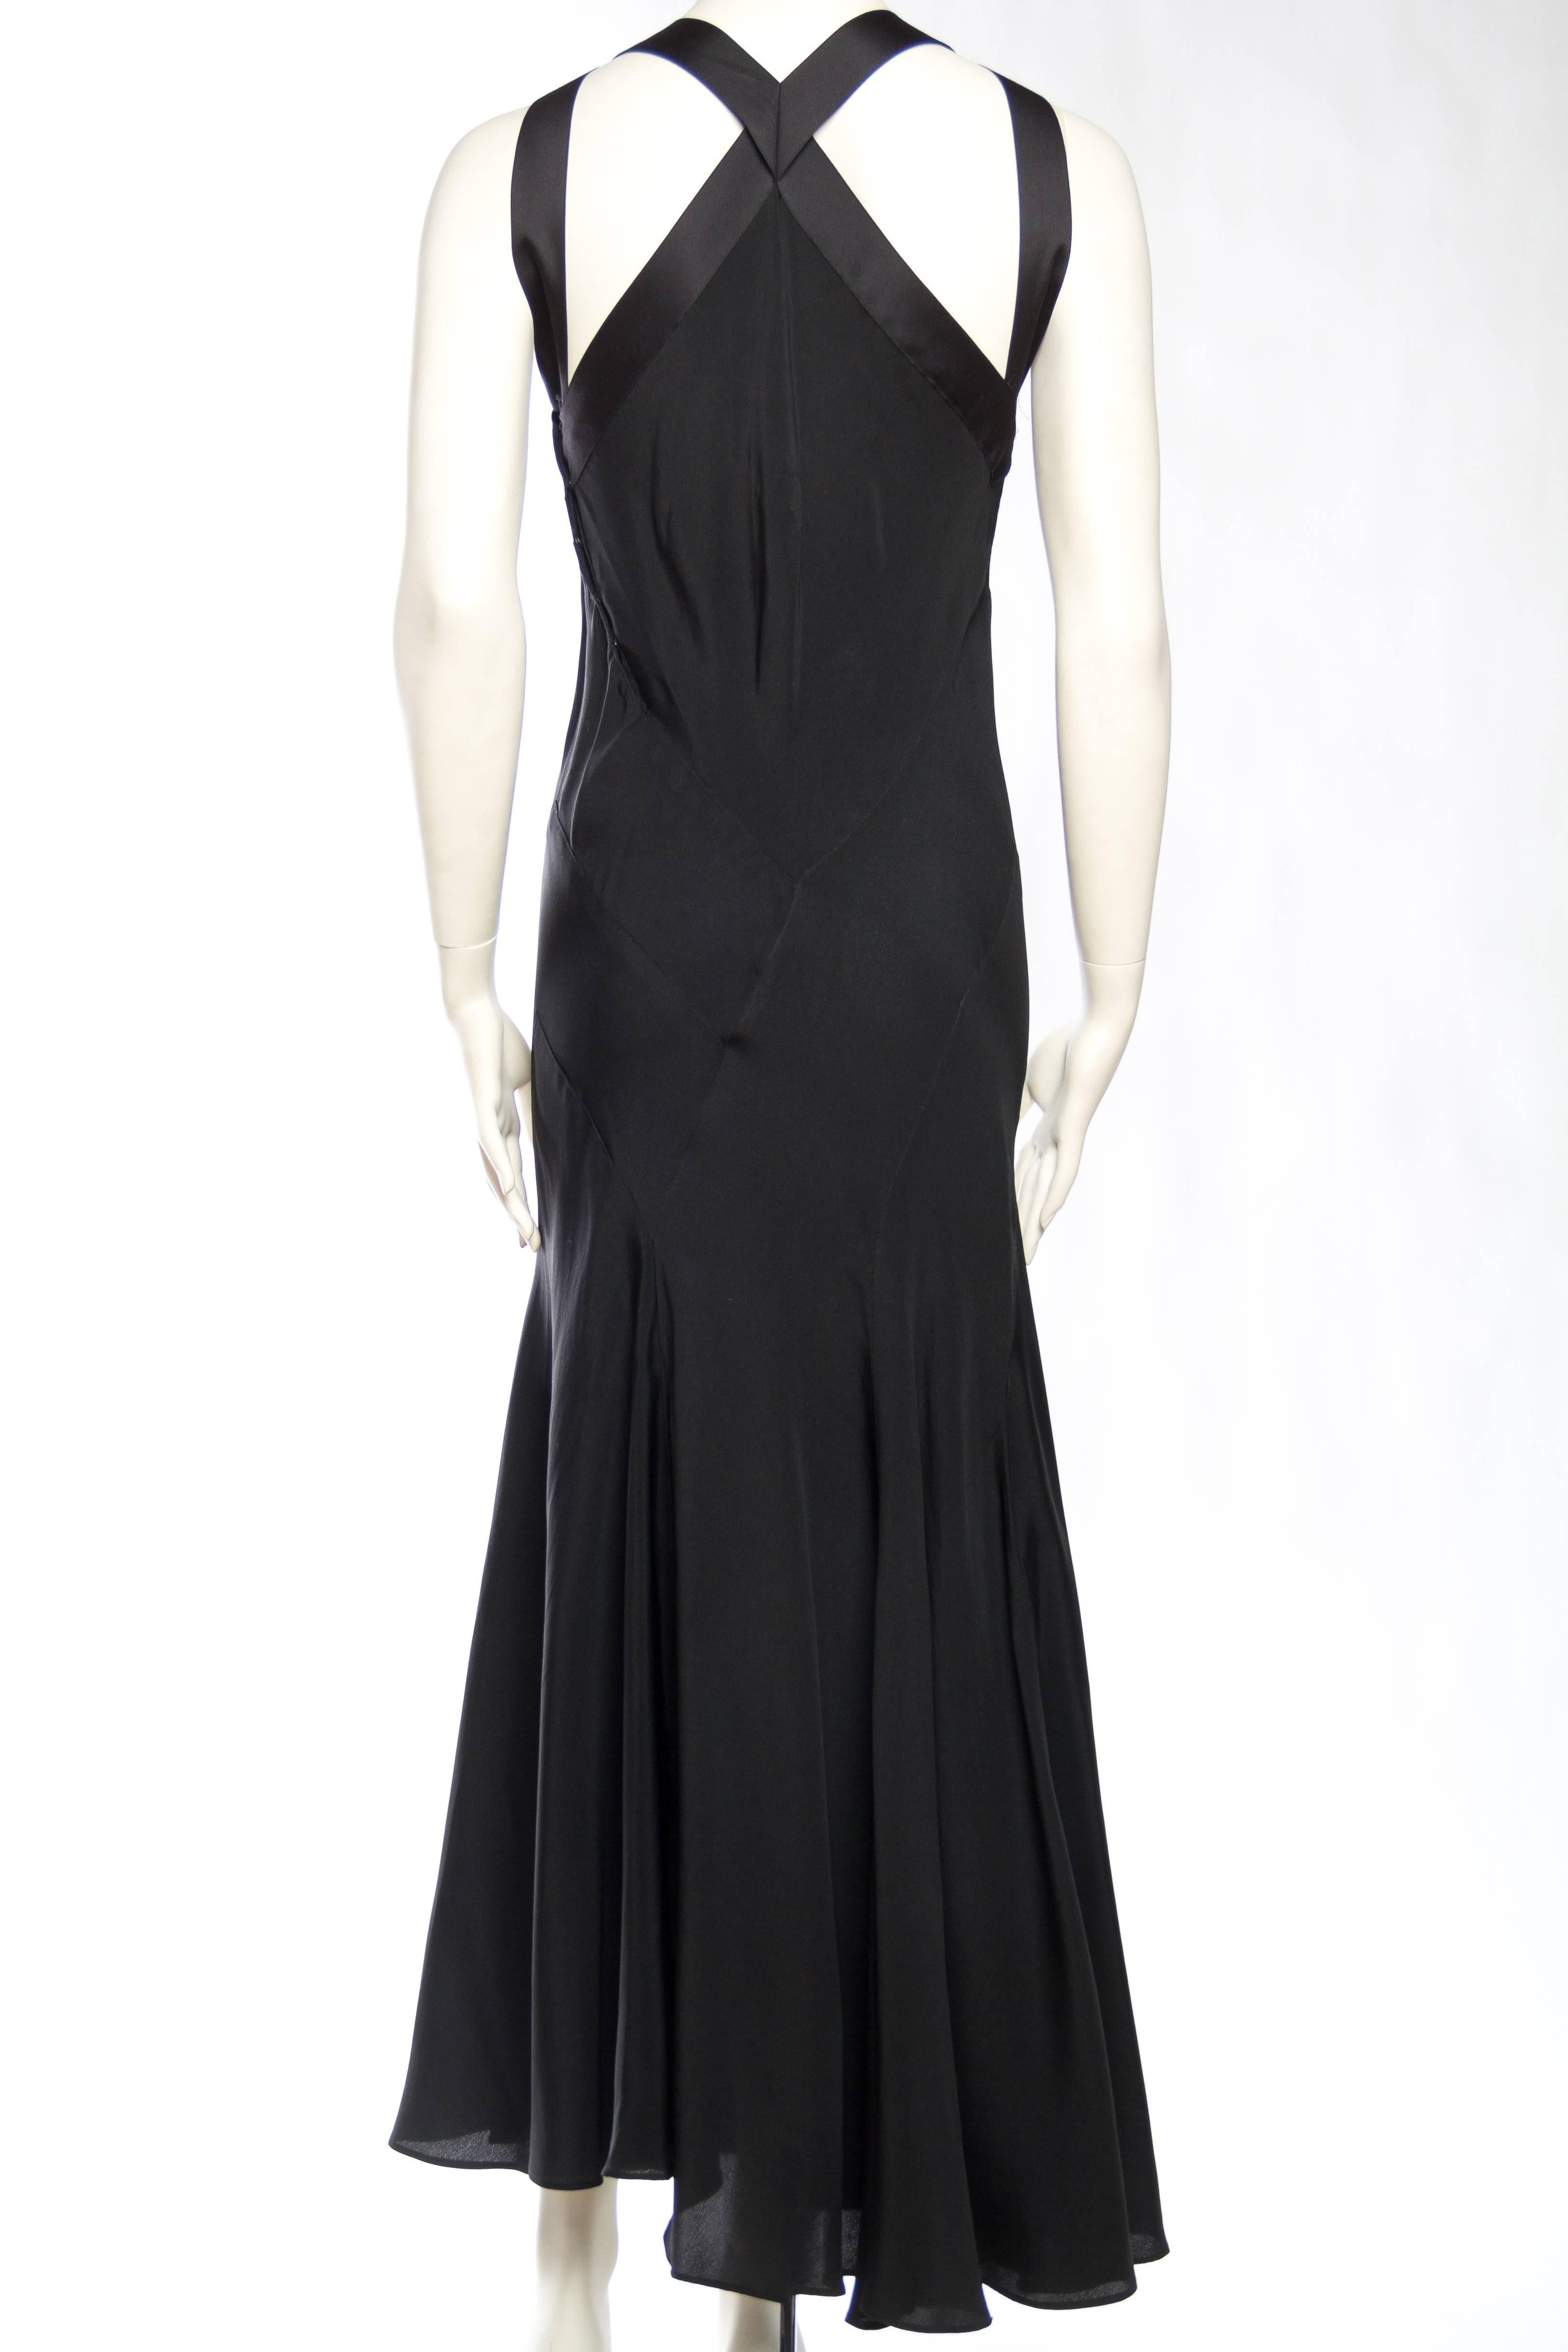 Women's 1930s Art-Deco Seamed Bias-Cut Gown with Ribbon Detailed Cut-outs